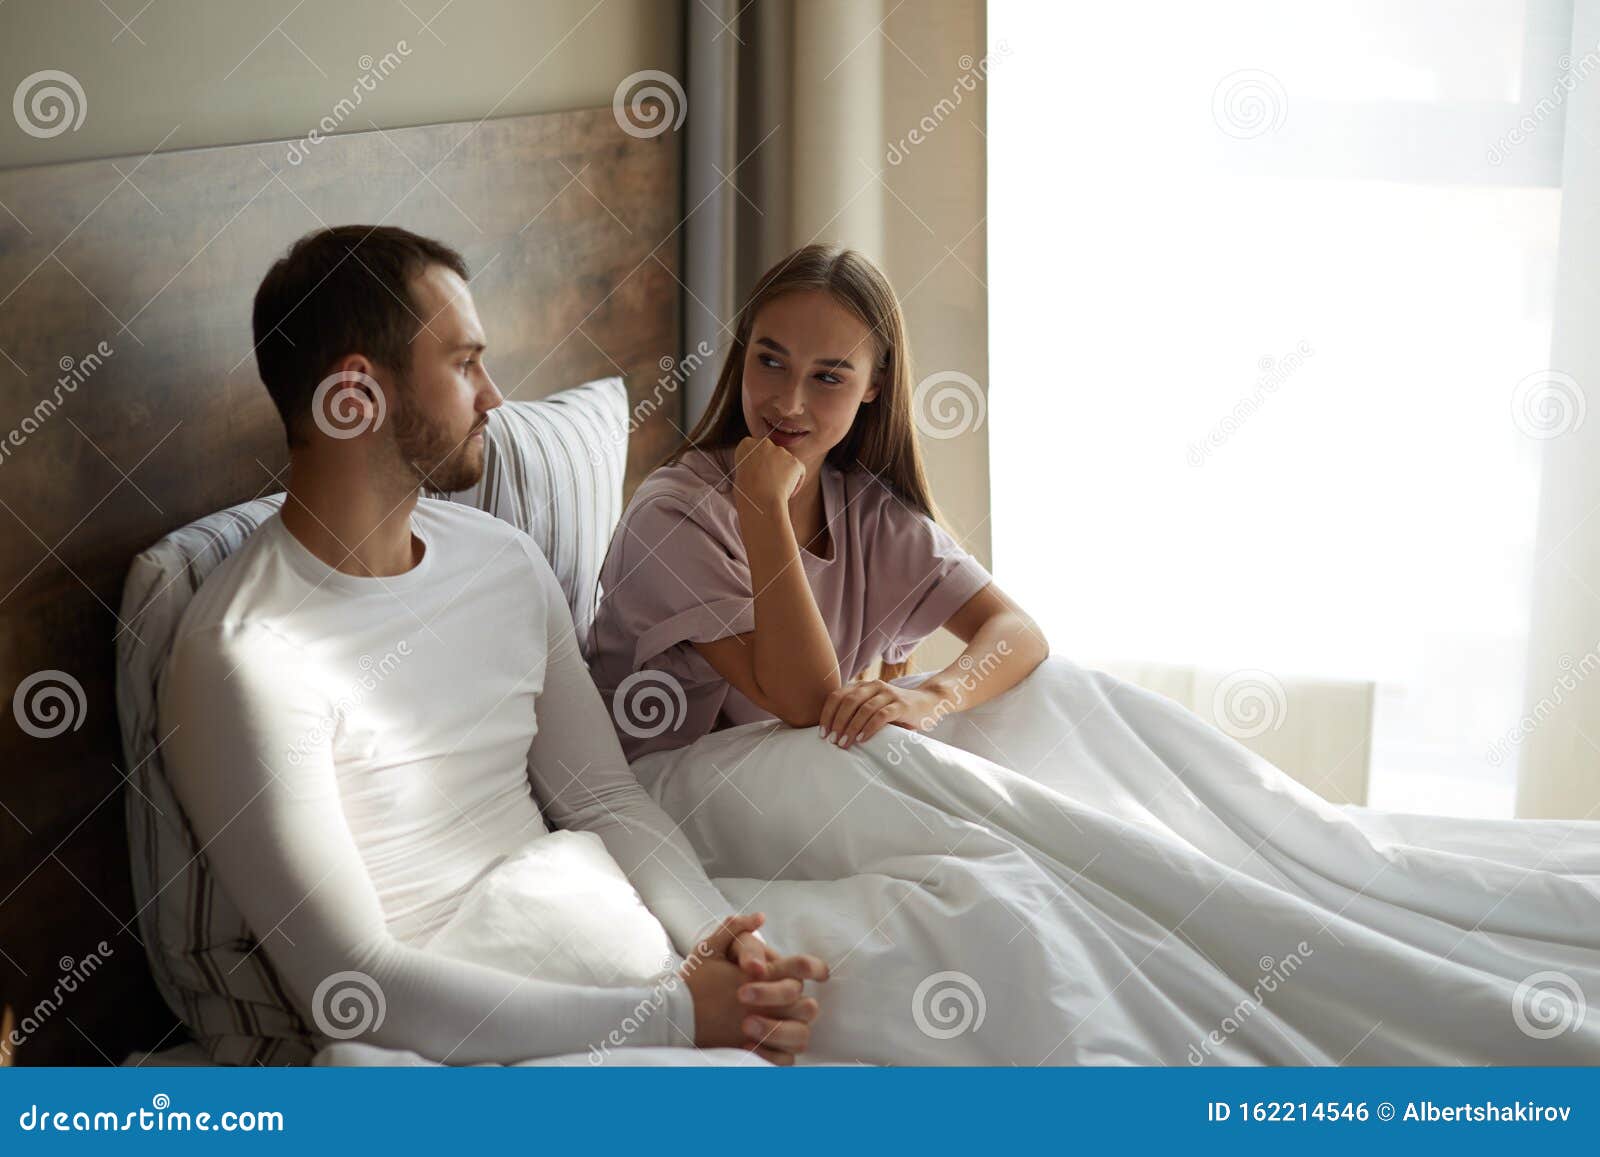 Photos Of Husband And Wife In Bedroom Uploadest